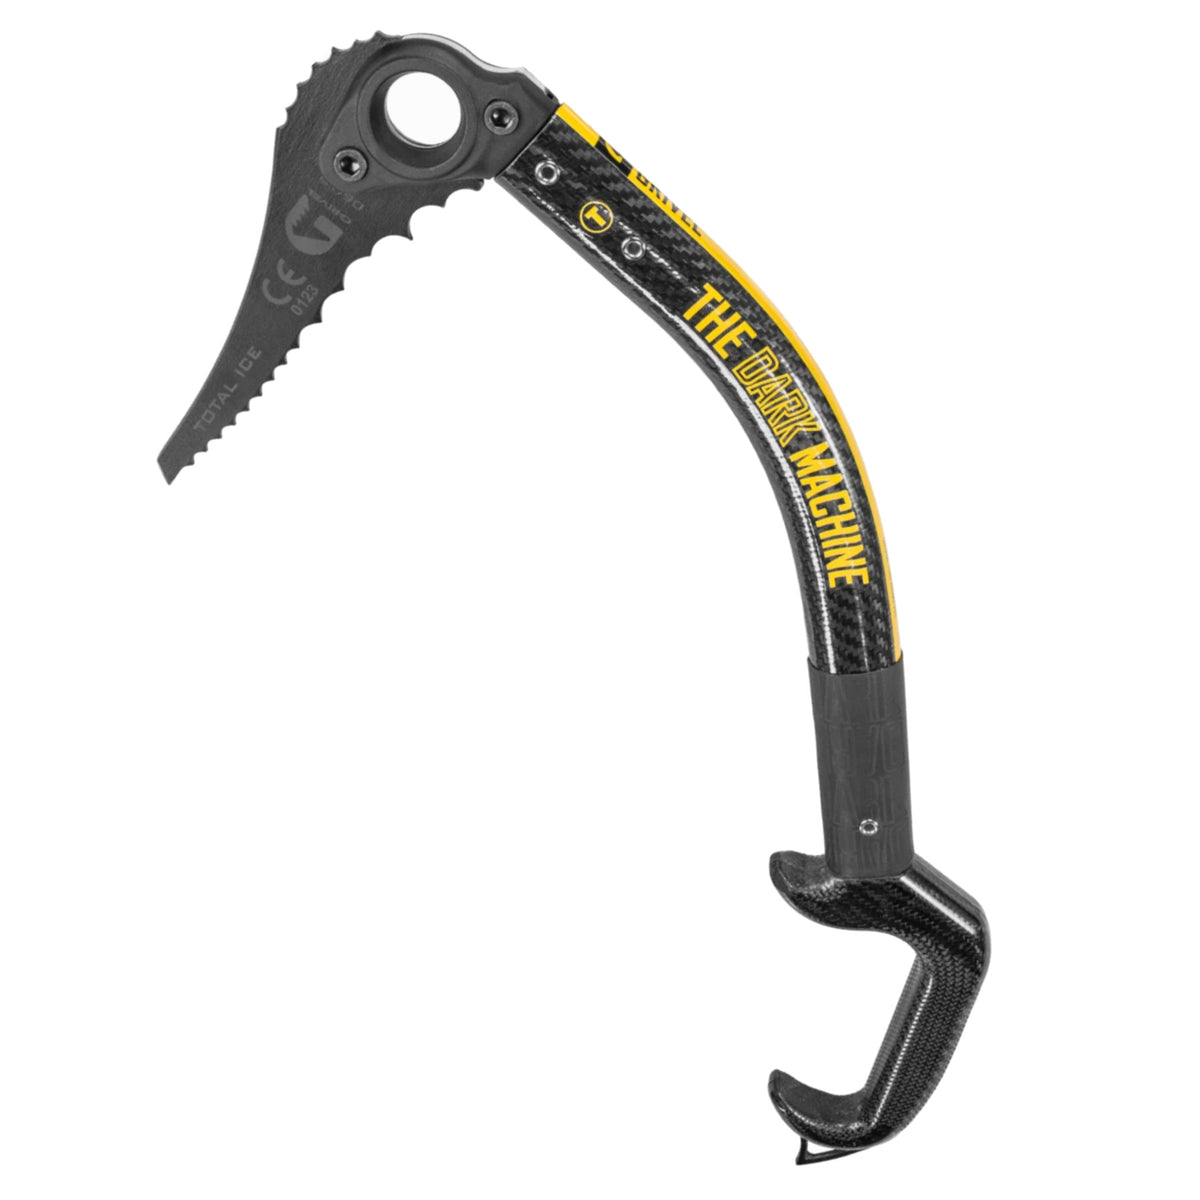 Grivel Dark Machine ice axe, side view shown in black/yellow colours